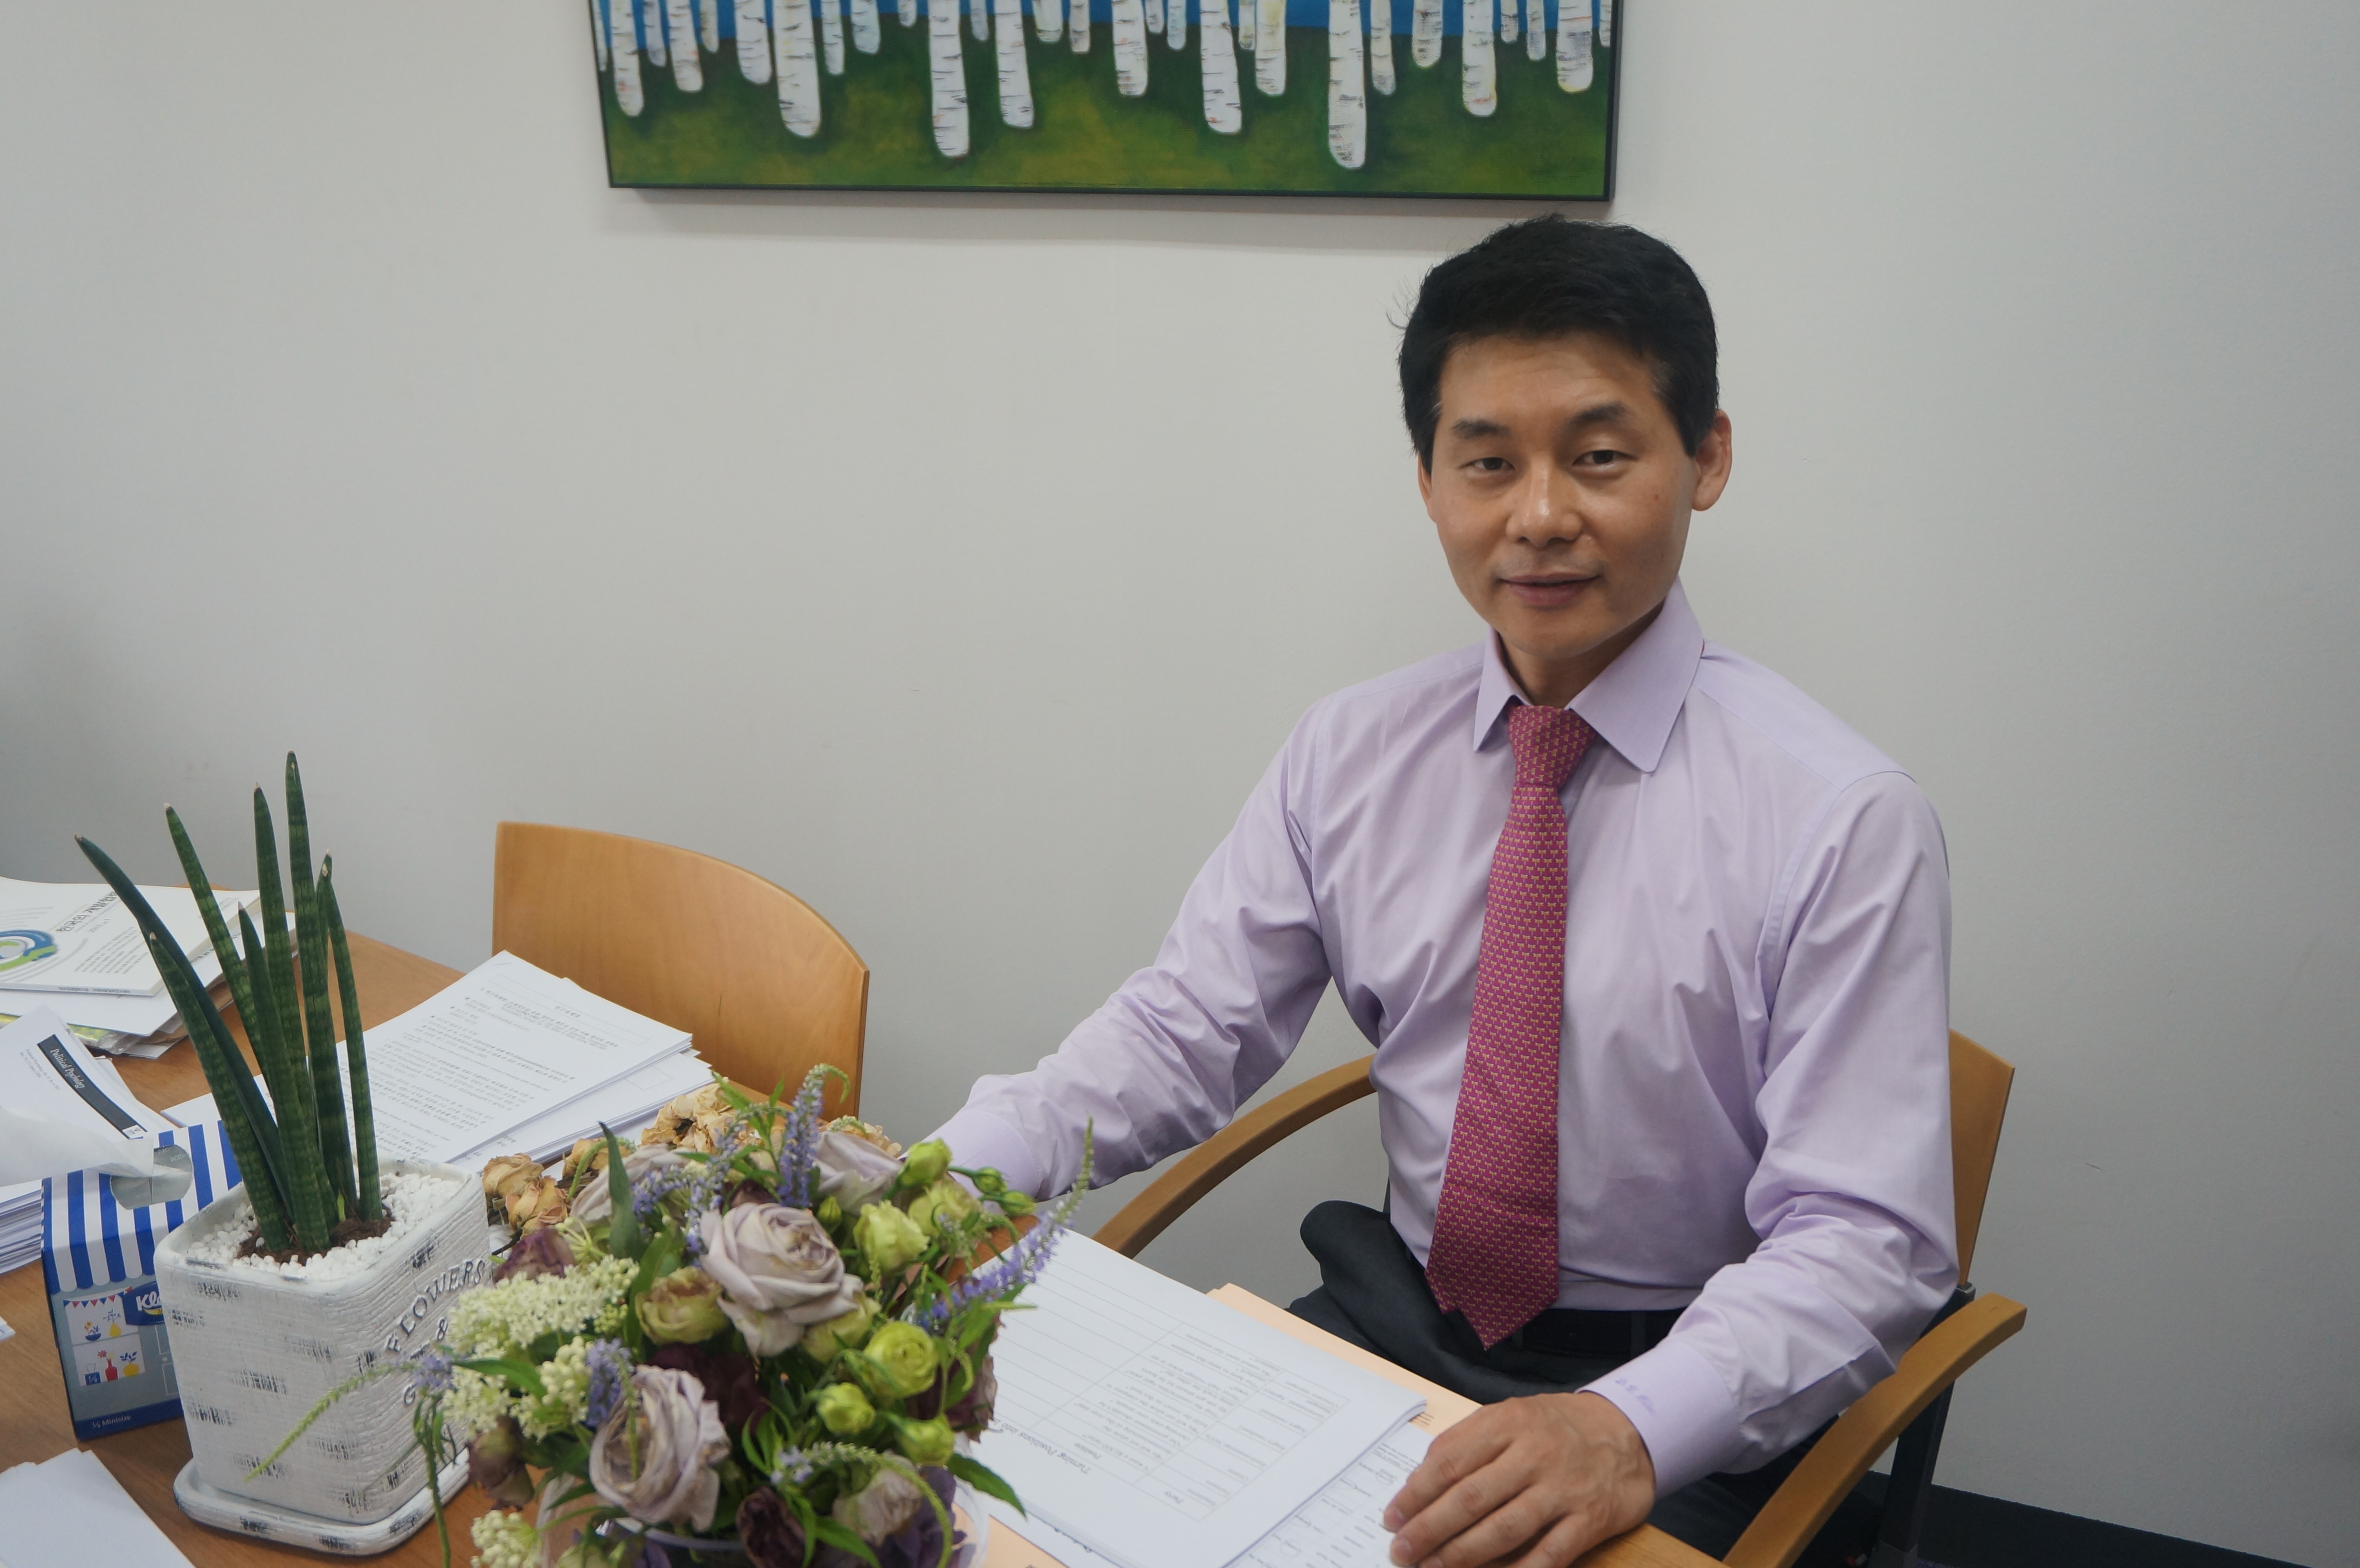 Professor Kim Dong-Young, the new MDP chair at the KDI School